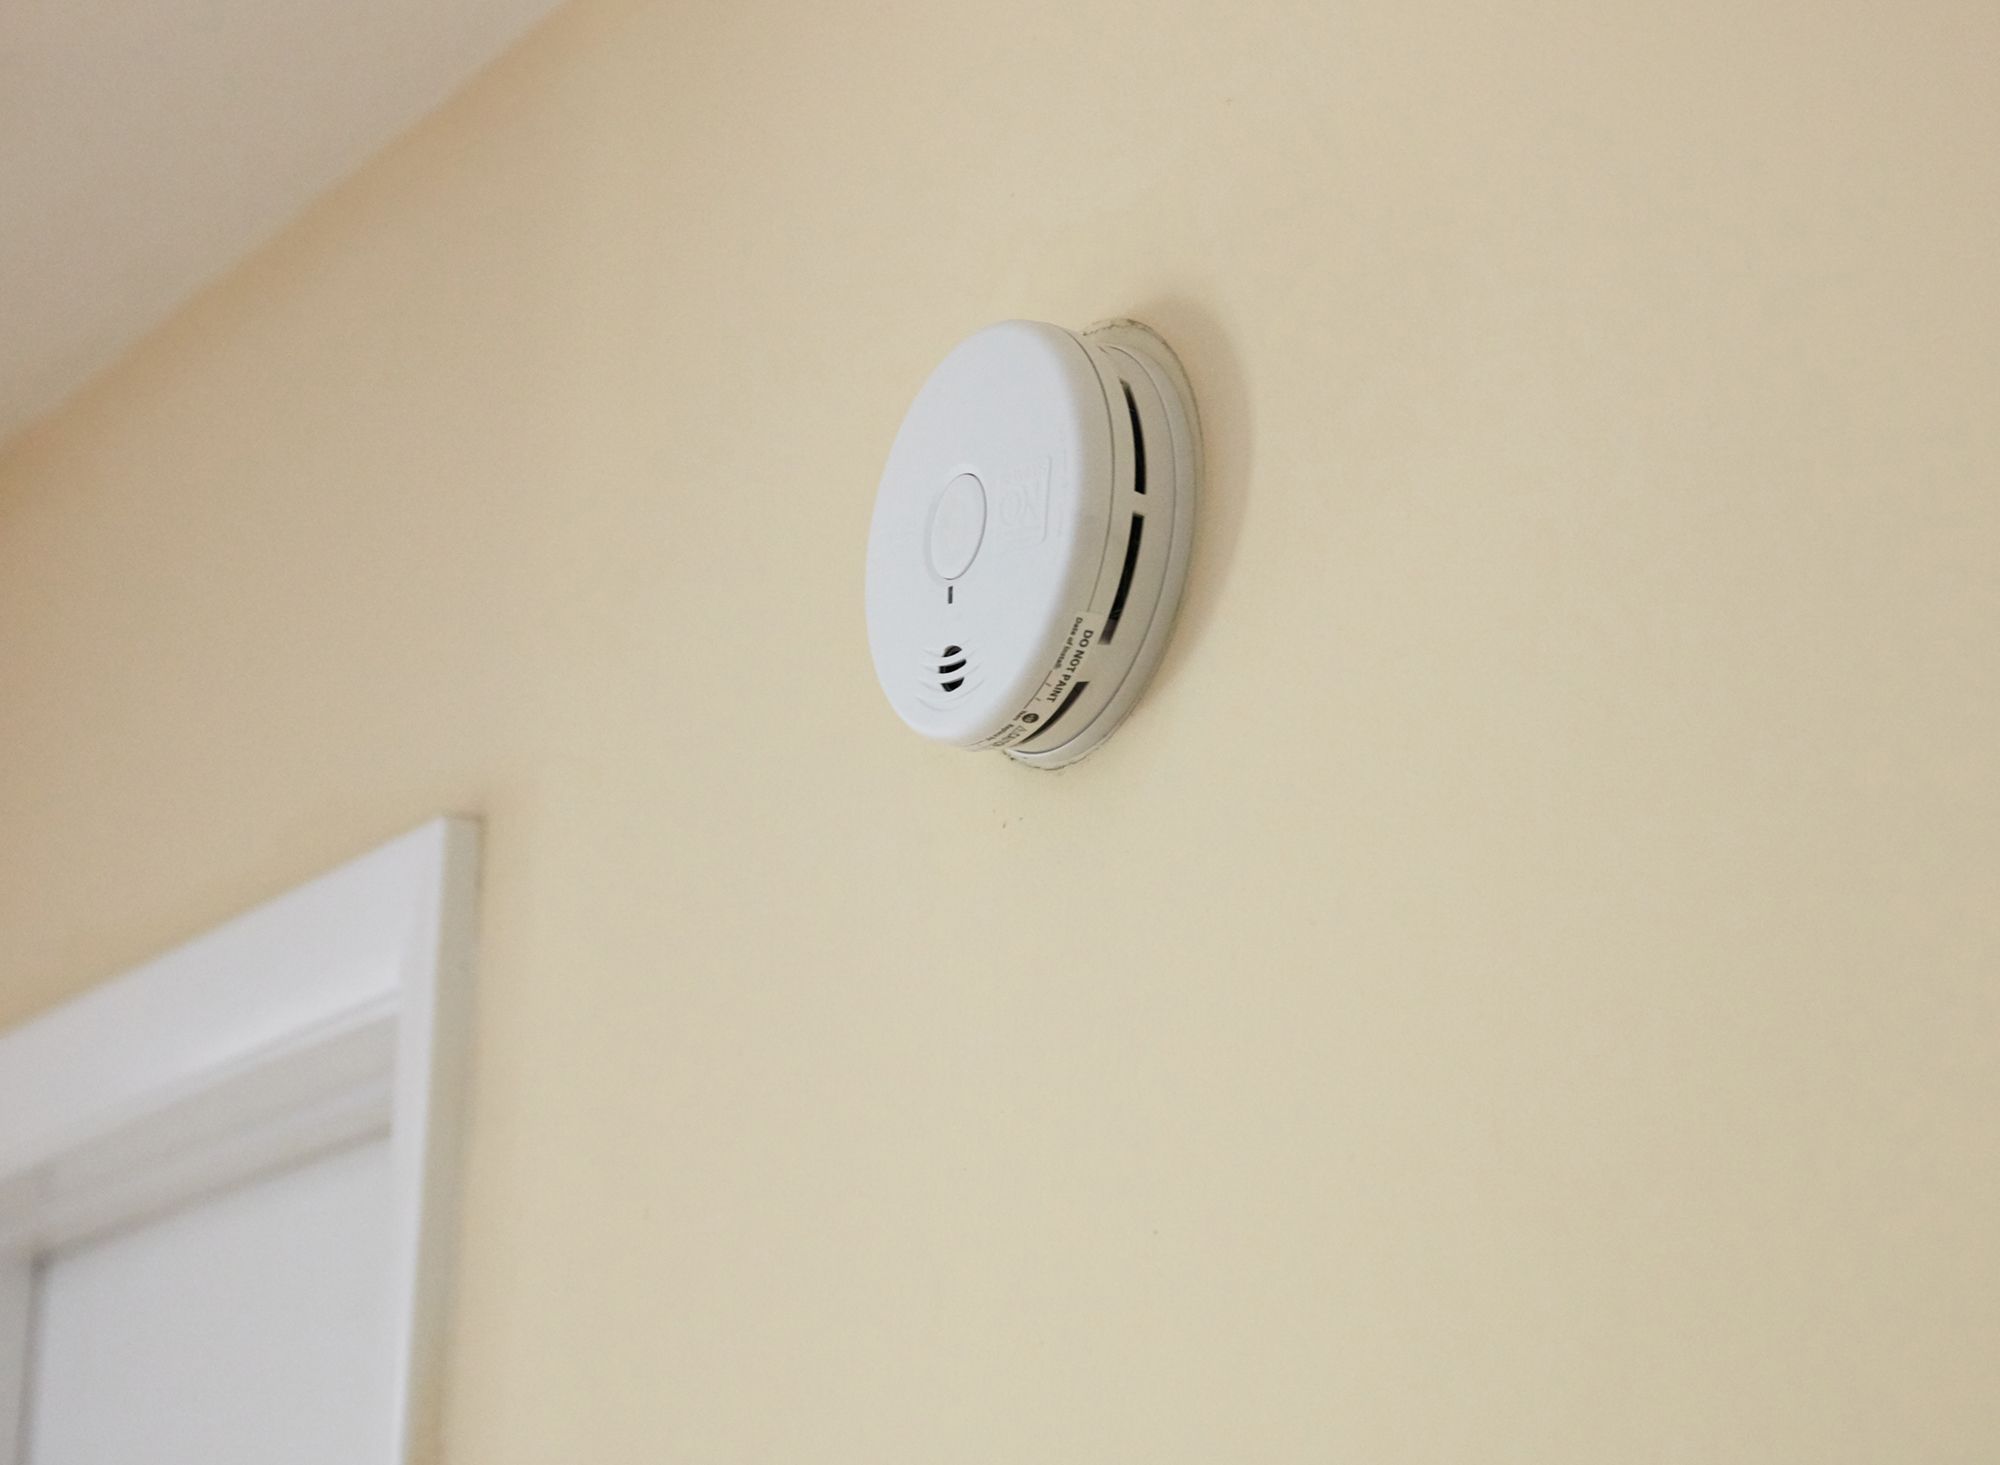 Where Should A Smoke Detector Be Placed